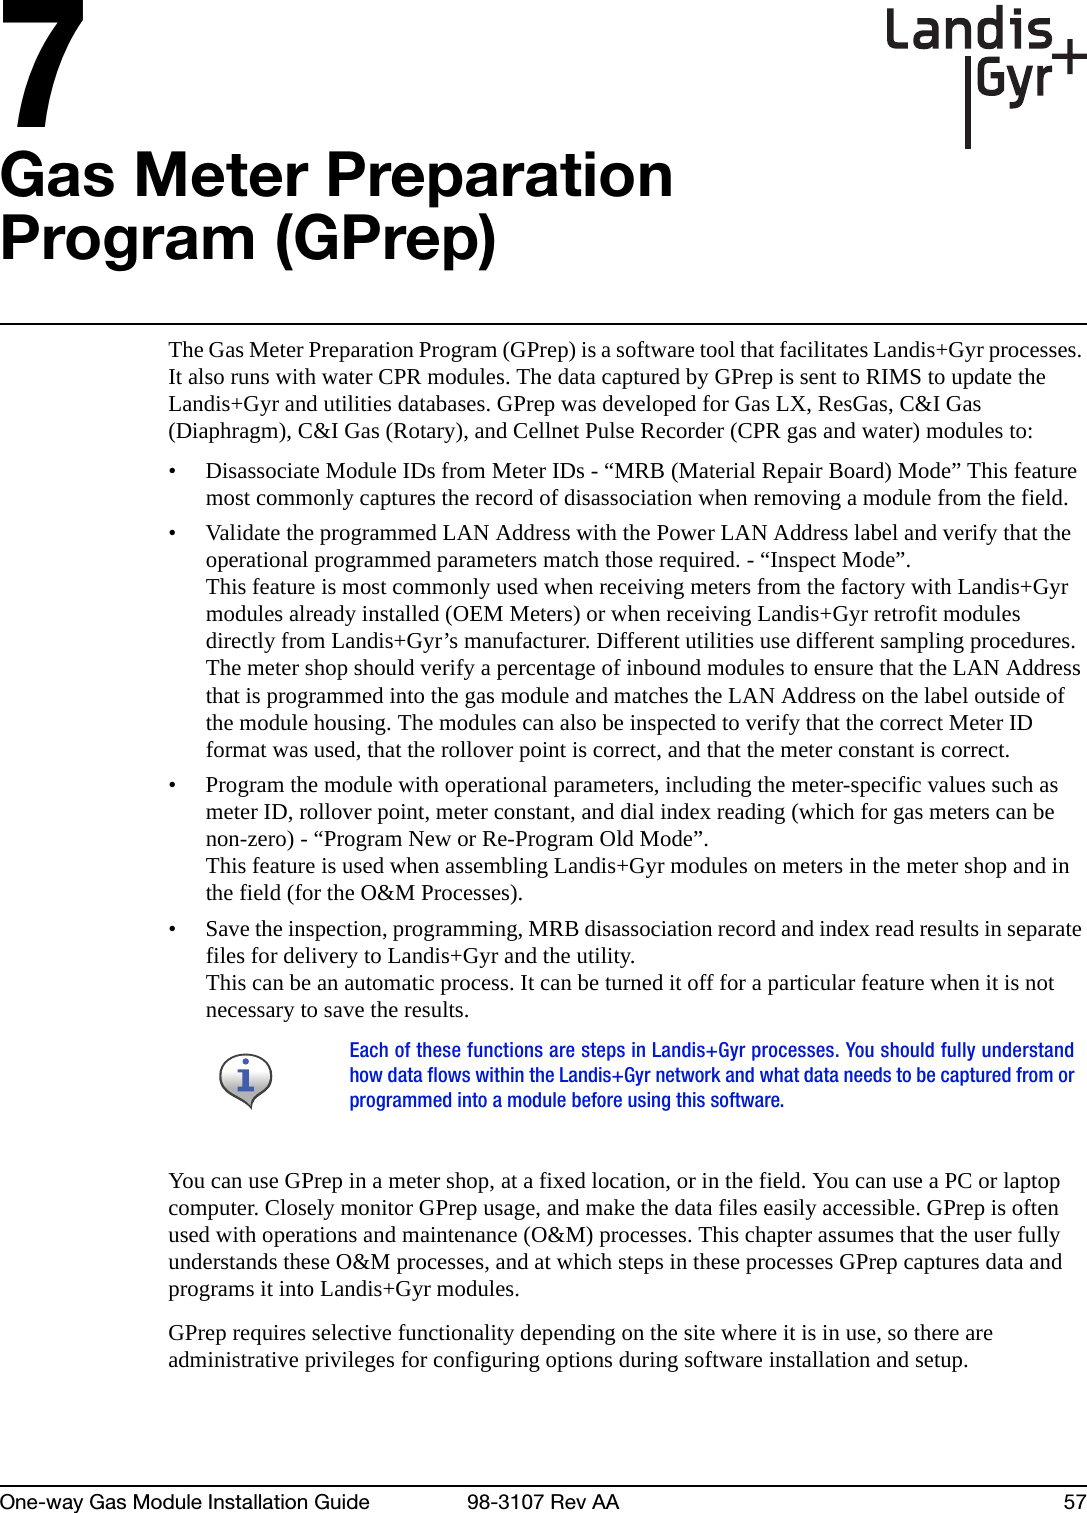 7One-way Gas Module Installation Guide 98-3107 Rev AA 57Gas Meter Preparation Program (GPrep)The Gas Meter Preparation Program (GPrep) is a software tool that facilitates Landis+Gyr processes. It also runs with water CPR modules. The data captured by GPrep is sent to RIMS to update the Landis+Gyr and utilities databases. GPrep was developed for Gas LX, ResGas, C&amp;I Gas (Diaphragm), C&amp;I Gas (Rotary), and Cellnet Pulse Recorder (CPR gas and water) modules to:• Disassociate Module IDs from Meter IDs - “MRB (Material Repair Board) Mode” This feature most commonly captures the record of disassociation when removing a module from the field.• Validate the programmed LAN Address with the Power LAN Address label and verify that the operational programmed parameters match those required. - “Inspect Mode”. This feature is most commonly used when receiving meters from the factory with Landis+Gyr modules already installed (OEM Meters) or when receiving Landis+Gyr retrofit modules directly from Landis+Gyr’s manufacturer. Different utilities use different sampling procedures. The meter shop should verify a percentage of inbound modules to ensure that the LAN Address that is programmed into the gas module and matches the LAN Address on the label outside of the module housing. The modules can also be inspected to verify that the correct Meter ID format was used, that the rollover point is correct, and that the meter constant is correct.• Program the module with operational parameters, including the meter-specific values such as meter ID, rollover point, meter constant, and dial index reading (which for gas meters can be non-zero) - “Program New or Re-Program Old Mode”. This feature is used when assembling Landis+Gyr modules on meters in the meter shop and in the field (for the O&amp;M Processes).• Save the inspection, programming, MRB disassociation record and index read results in separate files for delivery to Landis+Gyr and the utility.This can be an automatic process. It can be turned it off for a particular feature when it is not necessary to save the results.You can use GPrep in a meter shop, at a fixed location, or in the field. You can use a PC or laptop computer. Closely monitor GPrep usage, and make the data files easily accessible. GPrep is often used with operations and maintenance (O&amp;M) processes. This chapter assumes that the user fully understands these O&amp;M processes, and at which steps in these processes GPrep captures data and programs it into Landis+Gyr modules.GPrep requires selective functionality depending on the site where it is in use, so there are administrative privileges for configuring options during software installation and setup. Each of these functions are steps in Landis+Gyr processes. You should fully understandhow data flows within the Landis+Gyr network and what data needs to be captured from orprogrammed into a module before using this software.